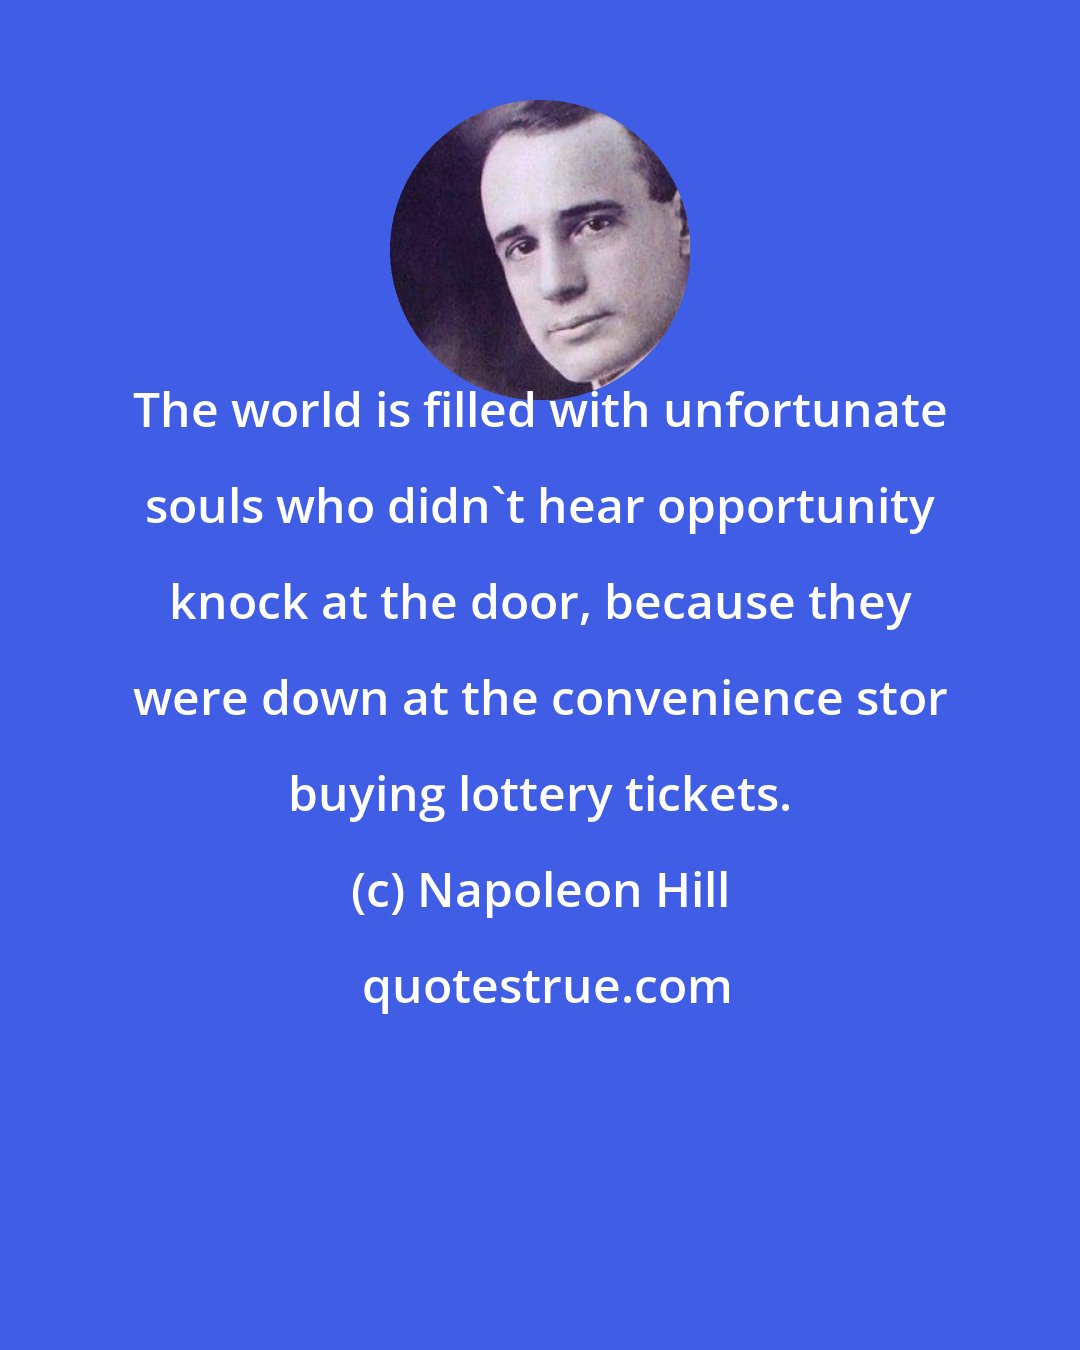 Napoleon Hill: The world is filled with unfortunate souls who didn't hear opportunity knock at the door, because they were down at the convenience stor buying lottery tickets.